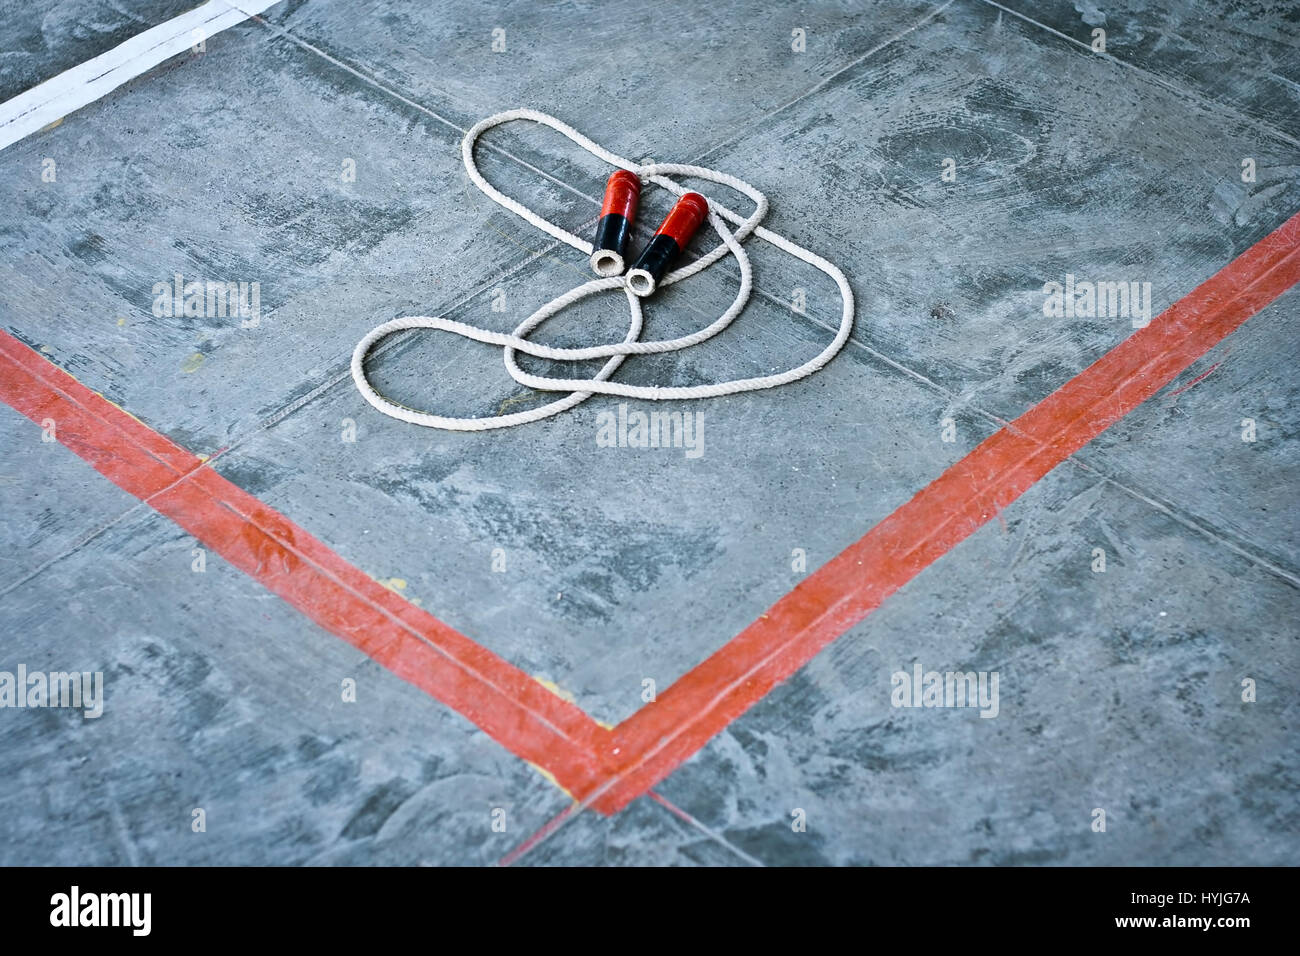 Skipping Rope On The Floor Stock Photo 137476174 Alamy